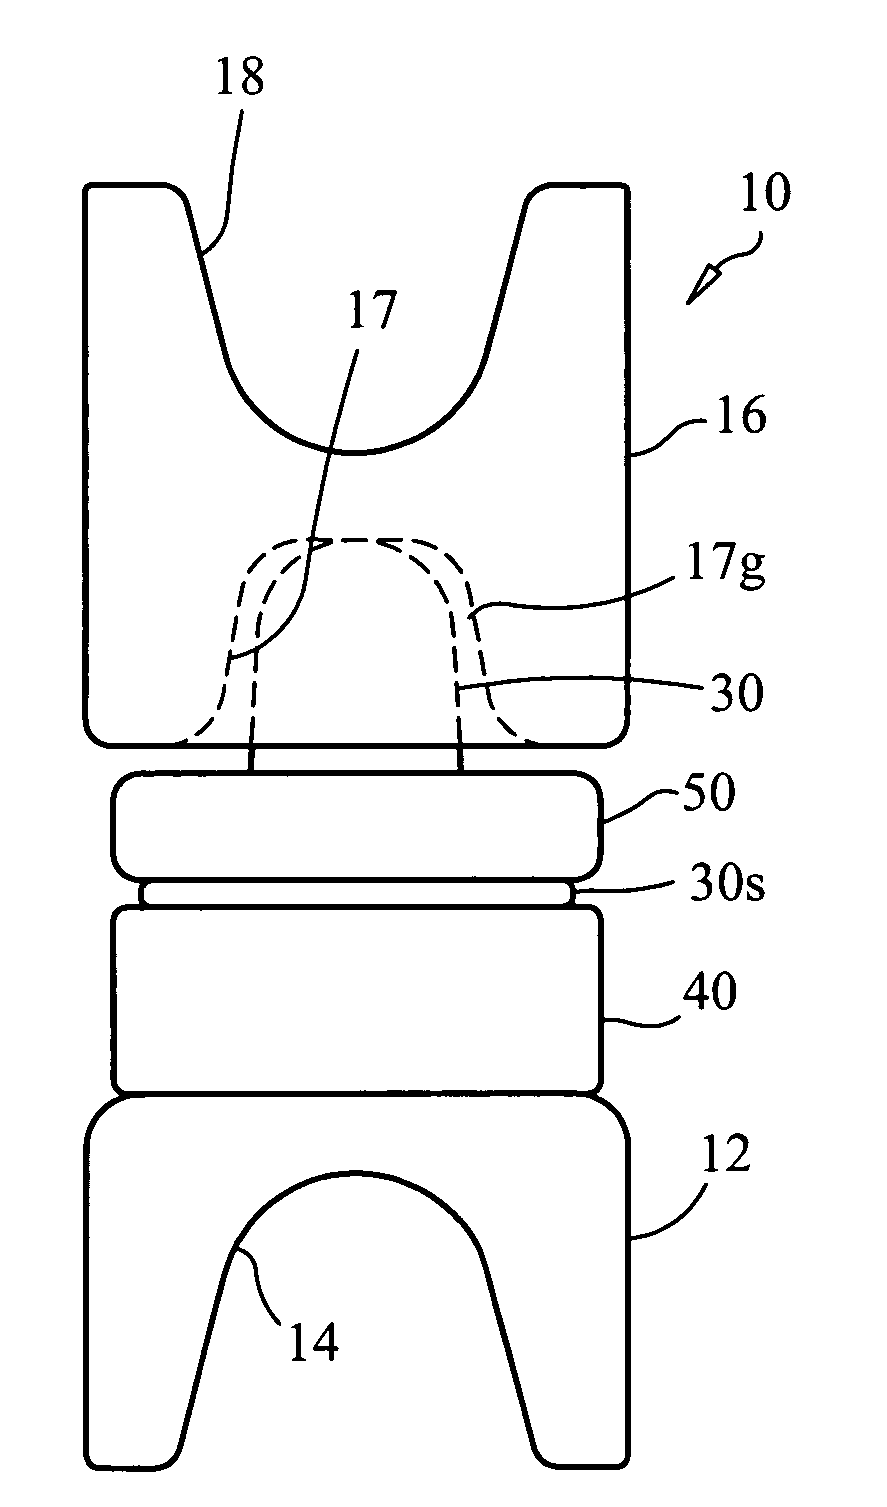 Interspinous dynamic stabilization implant and method of implanting